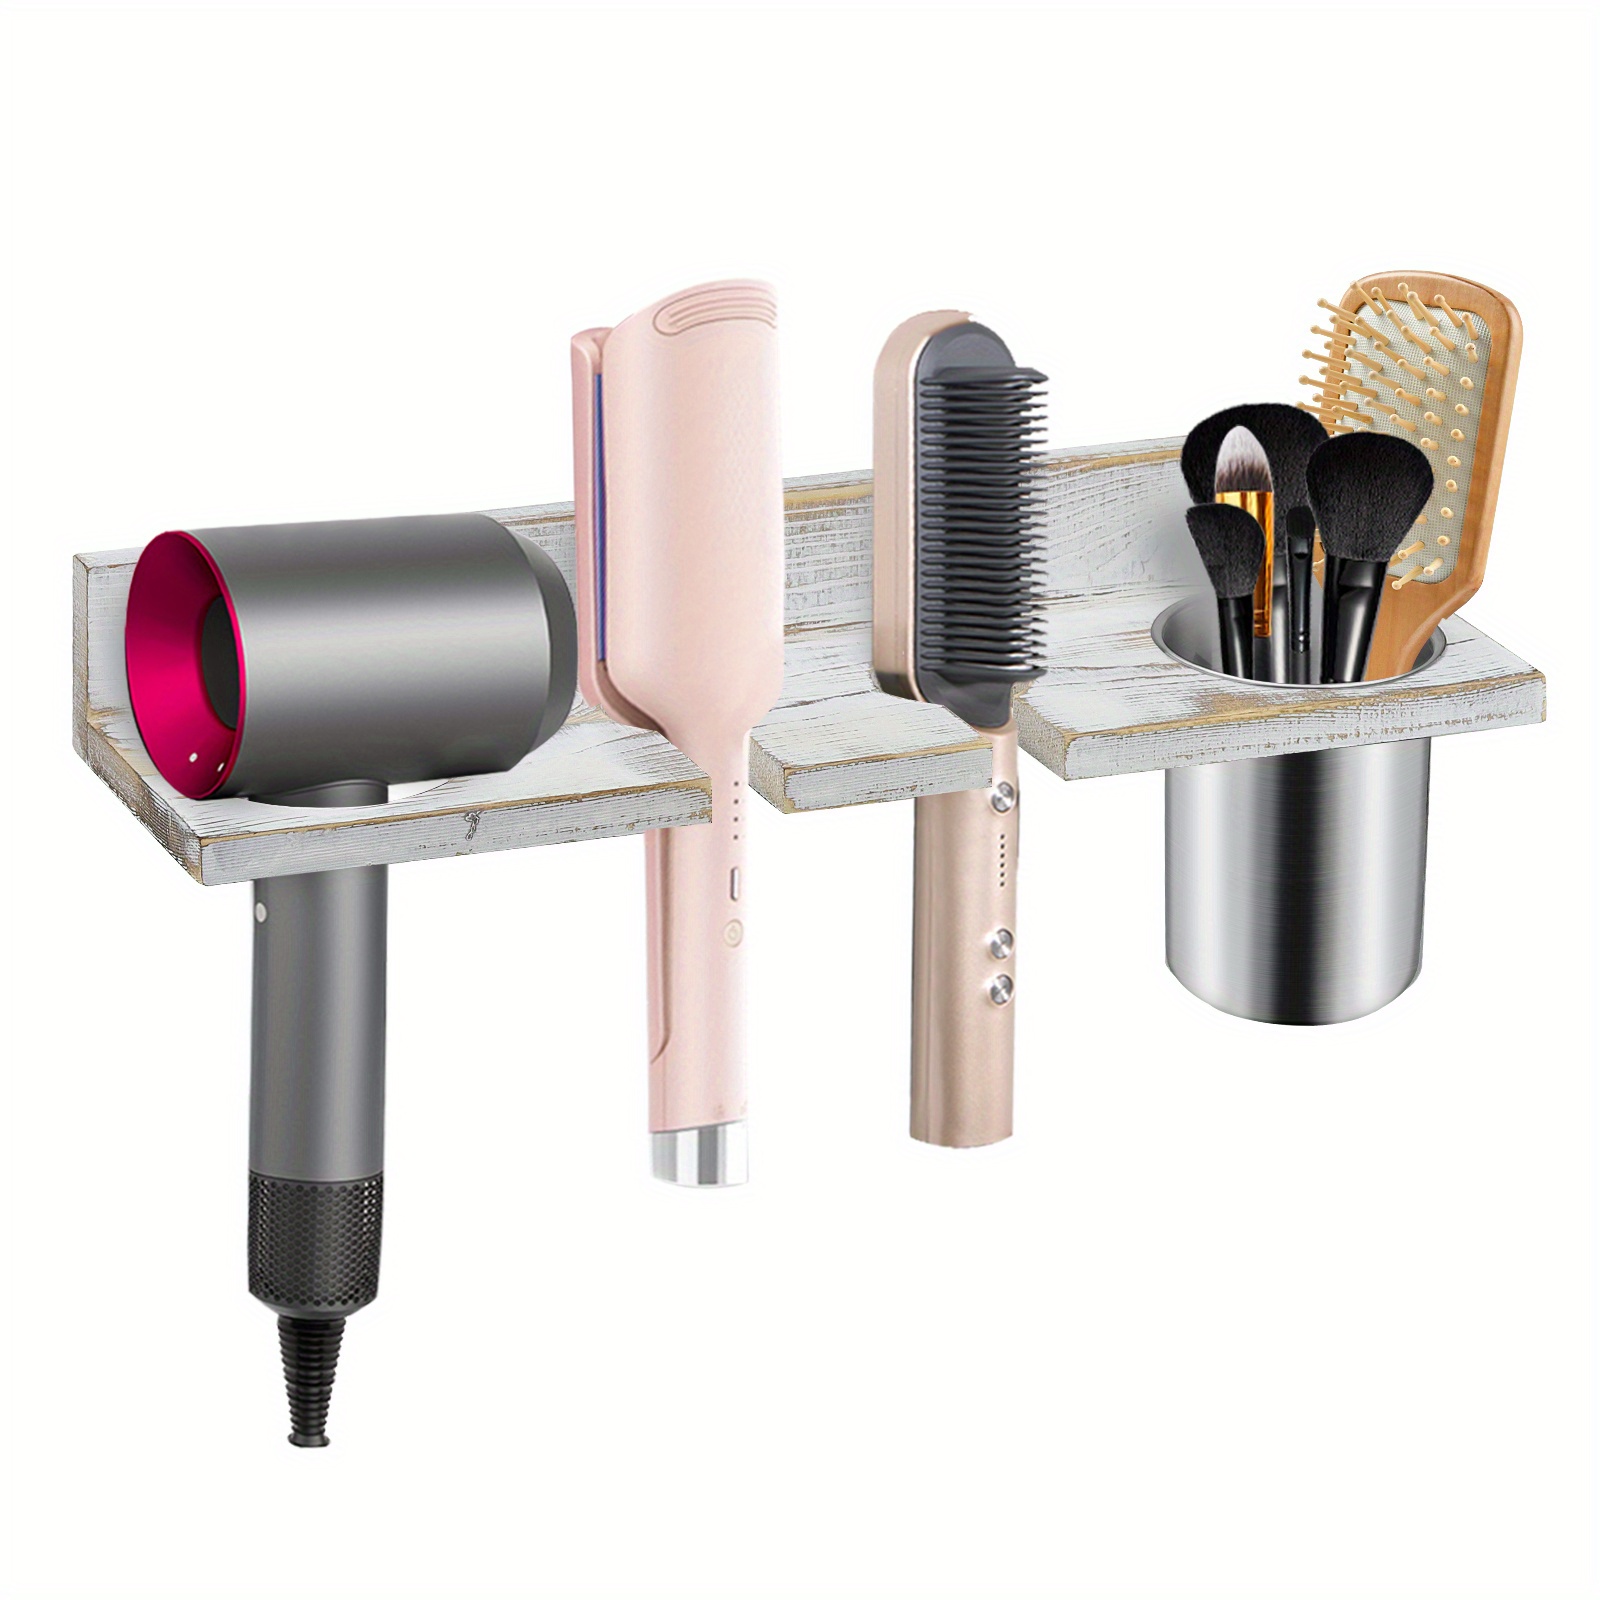 Hair Dryer & Tools Organizer - Flat Iron, Curling Wand, Brushes